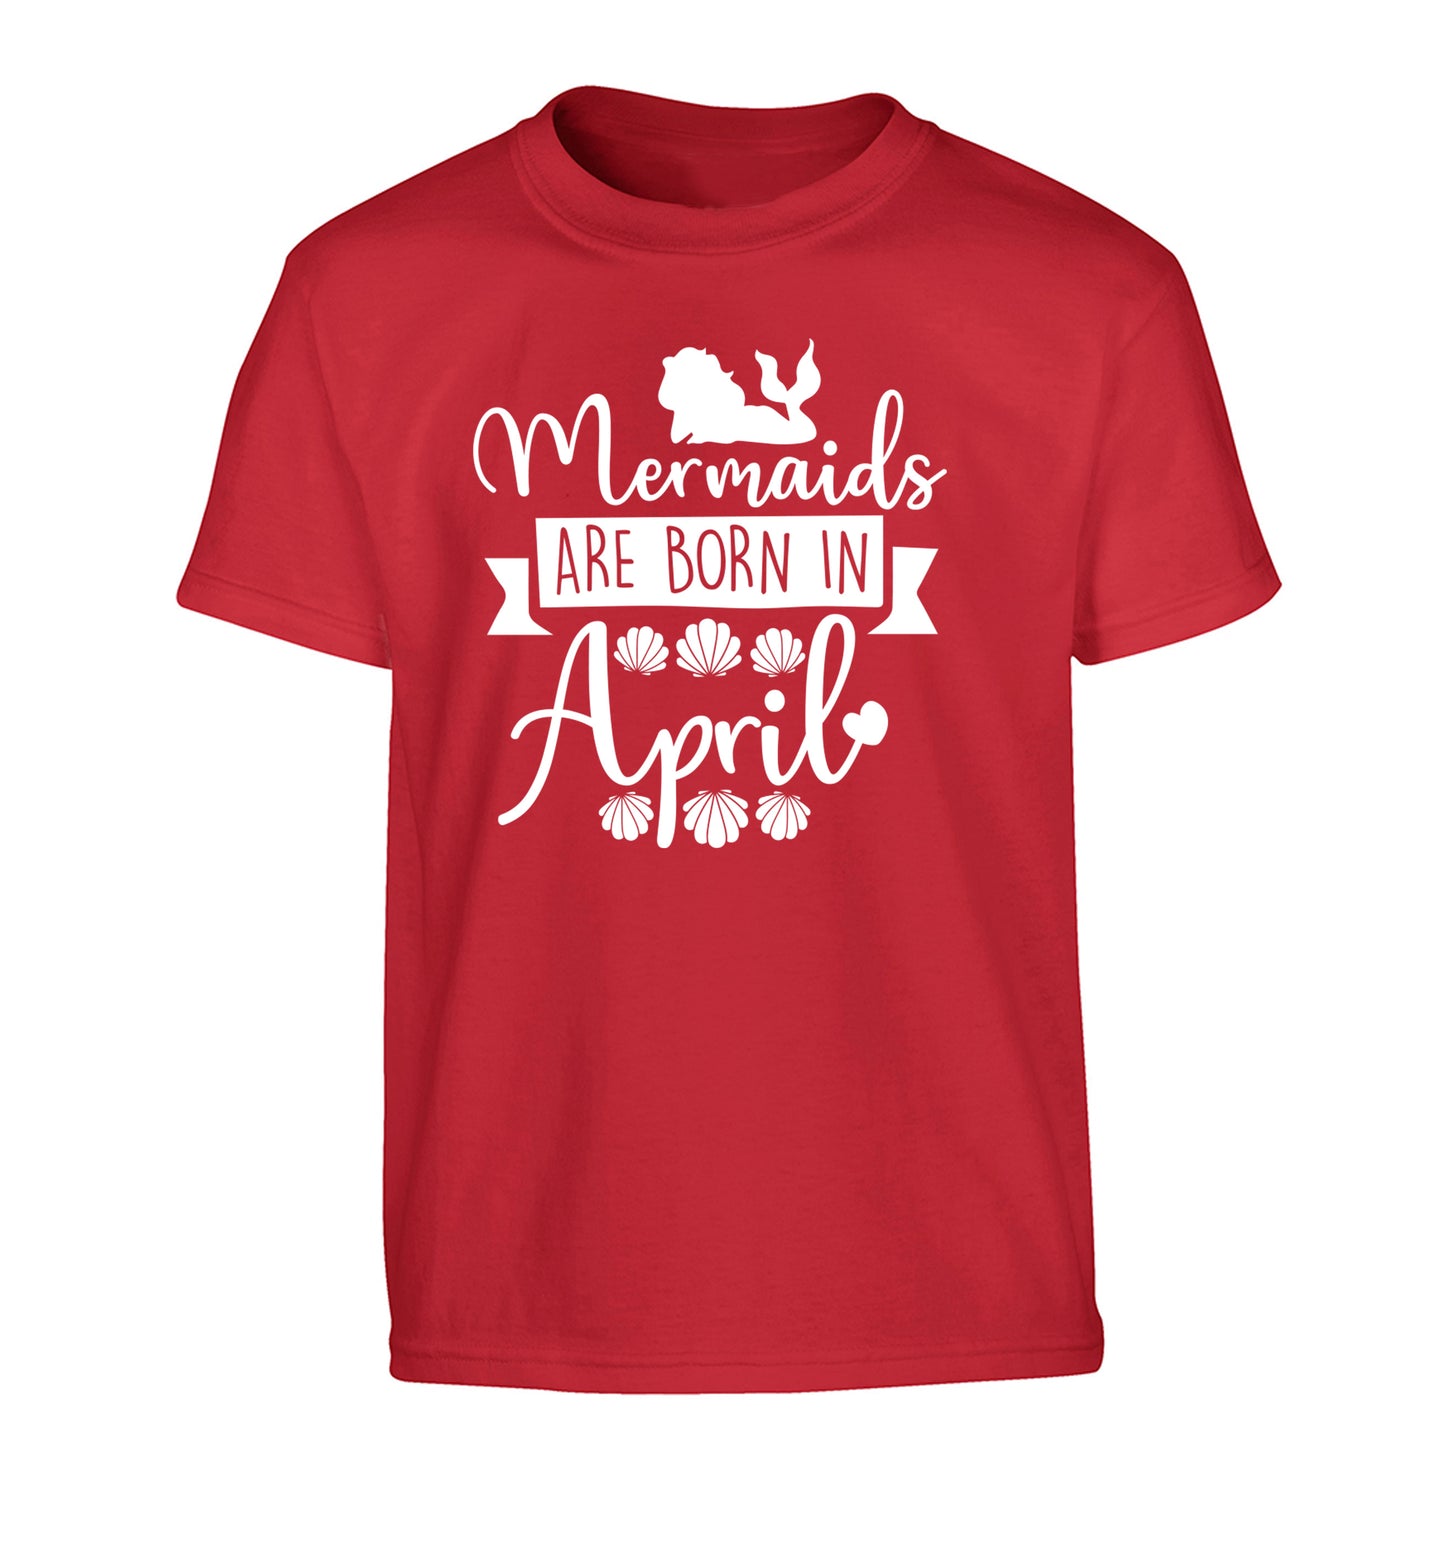 Mermaids are born in April Children's red Tshirt 12-13 Years